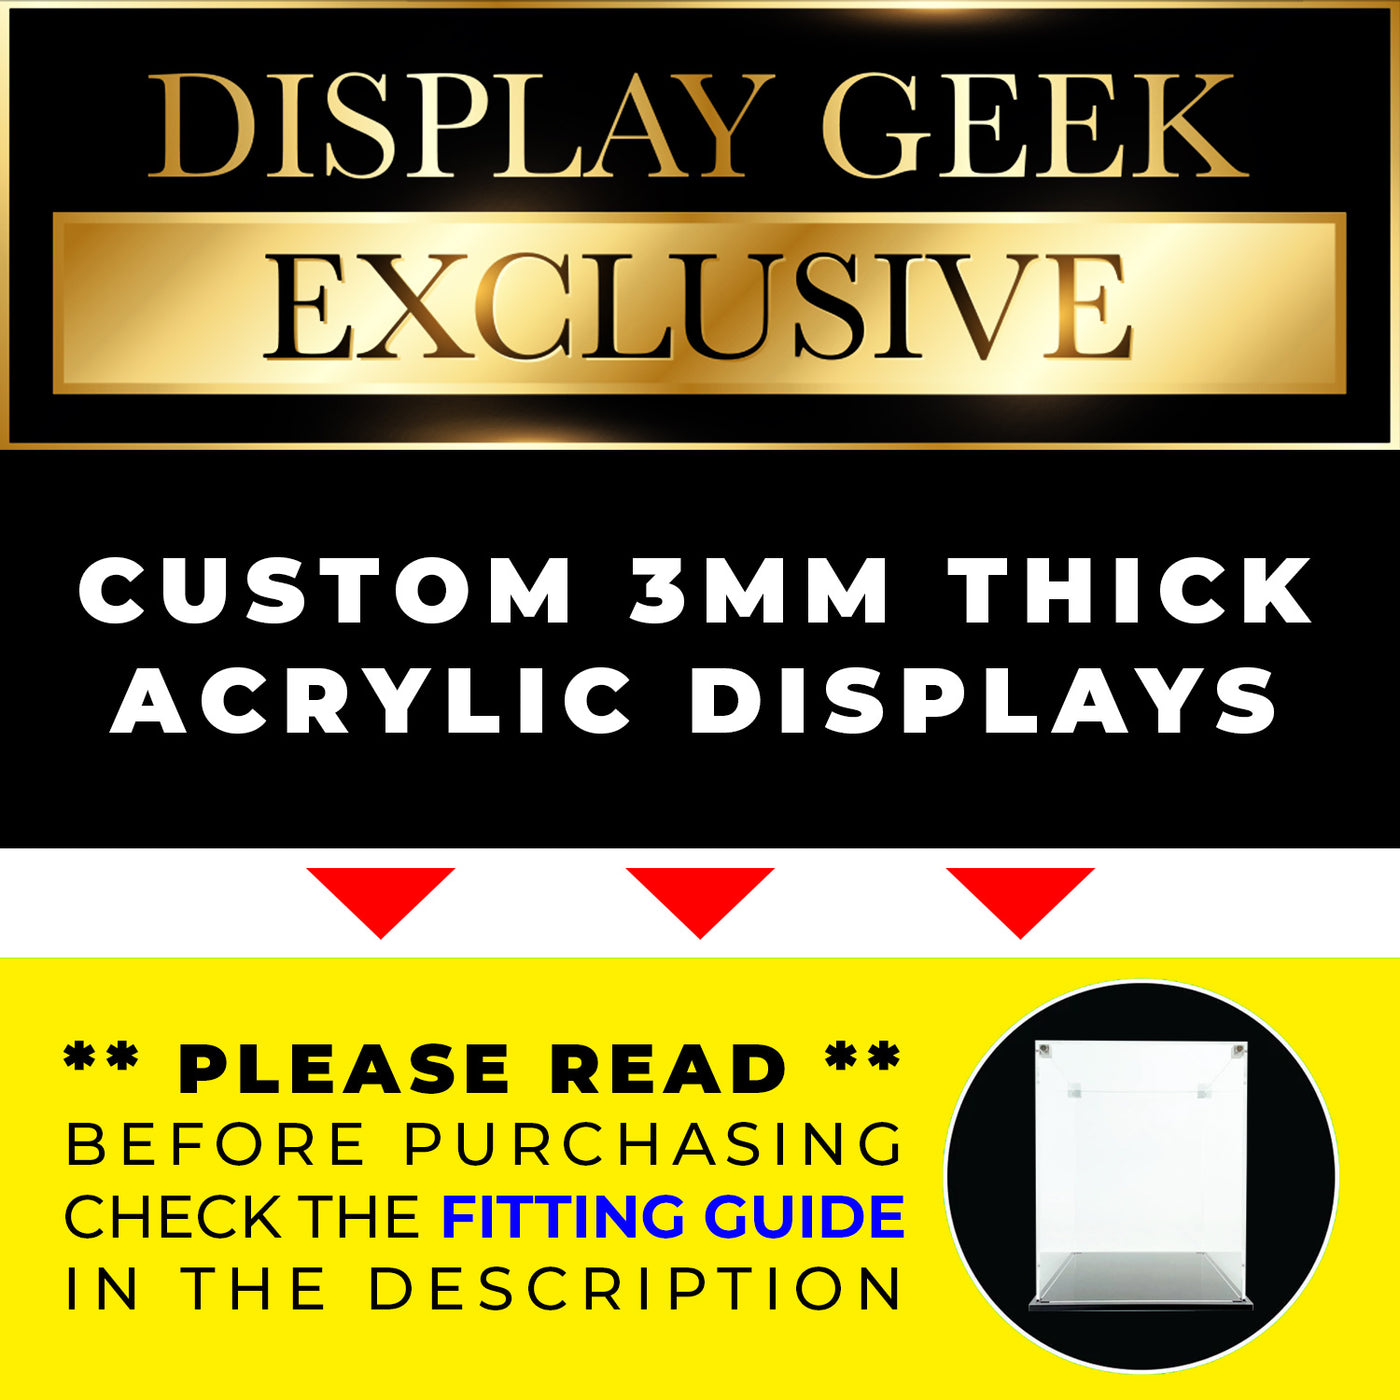 13h x 8.35w x 8.35d Funko Pop 10 inch Skinny Custom Acrylic Display Case for Funko Pop Grails on The Protector Guide App by Display Geek